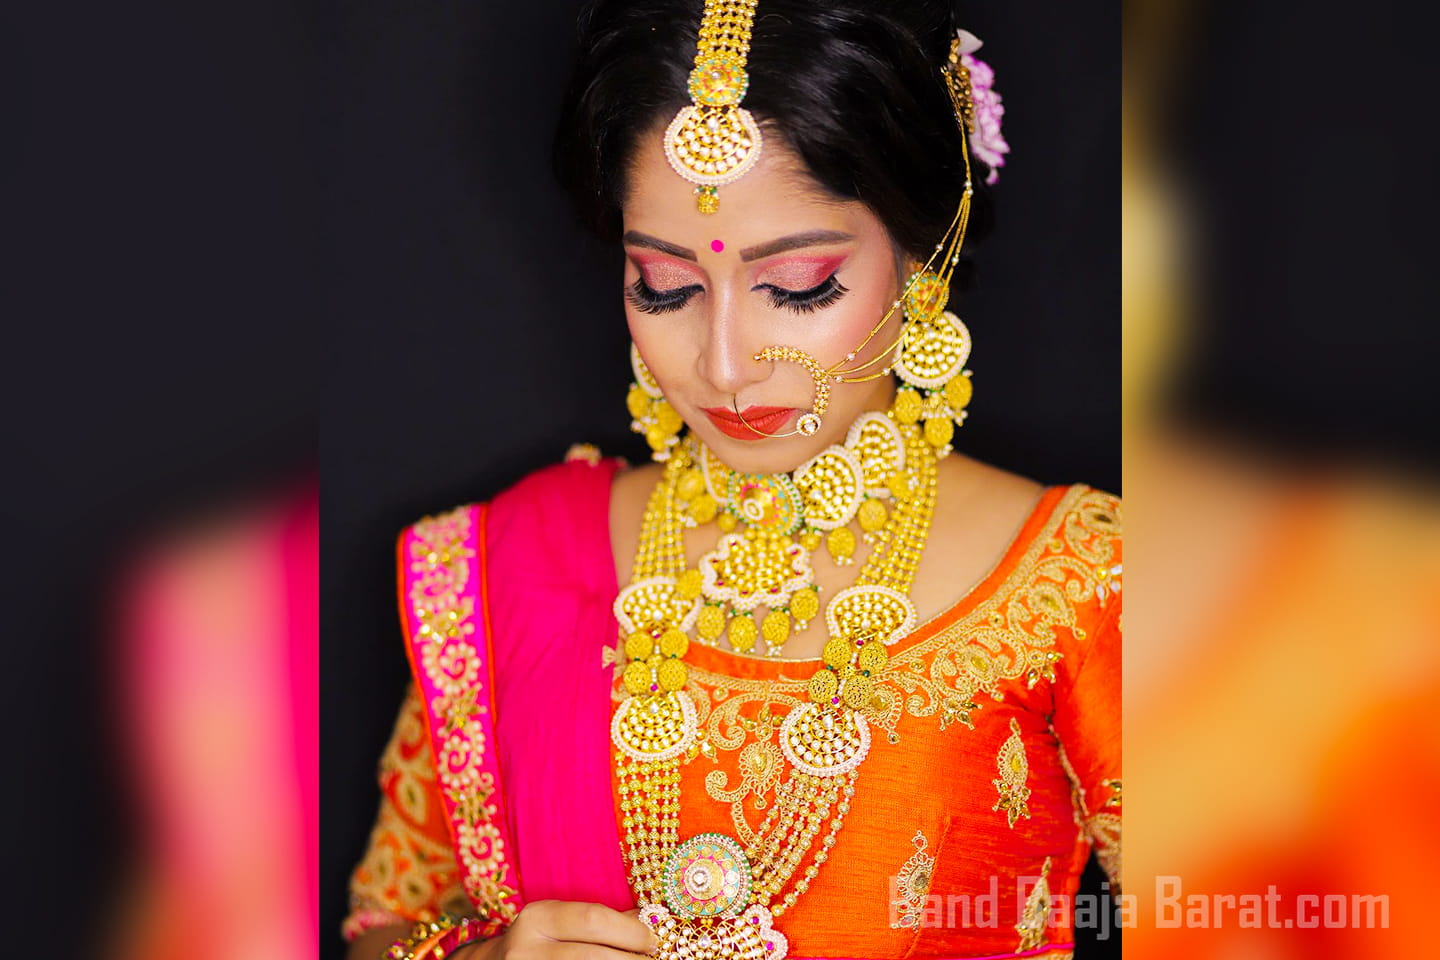 beauitful bridal makeup by Rehance The Bridal Studio